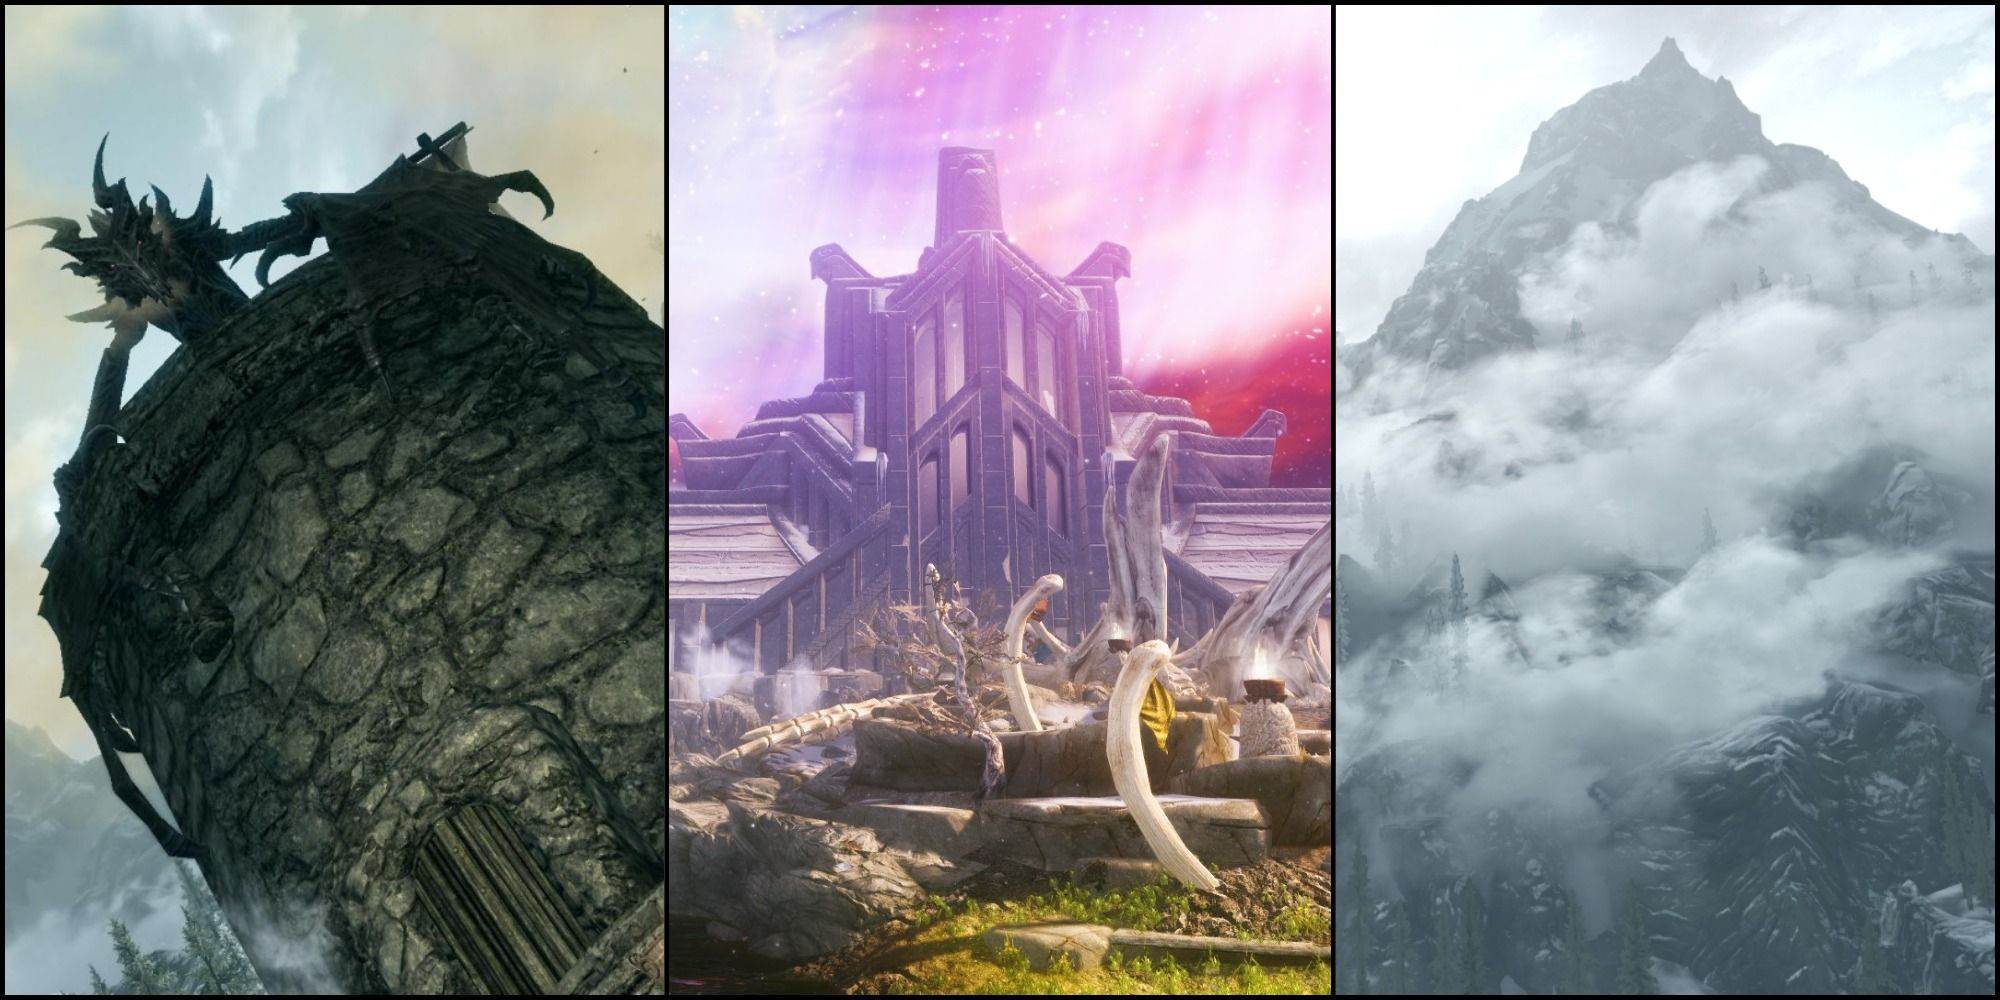 Skyrim memorable moments split image with Alduin to the left, the Hall of Valor in the middle and the Throat of the World to the right